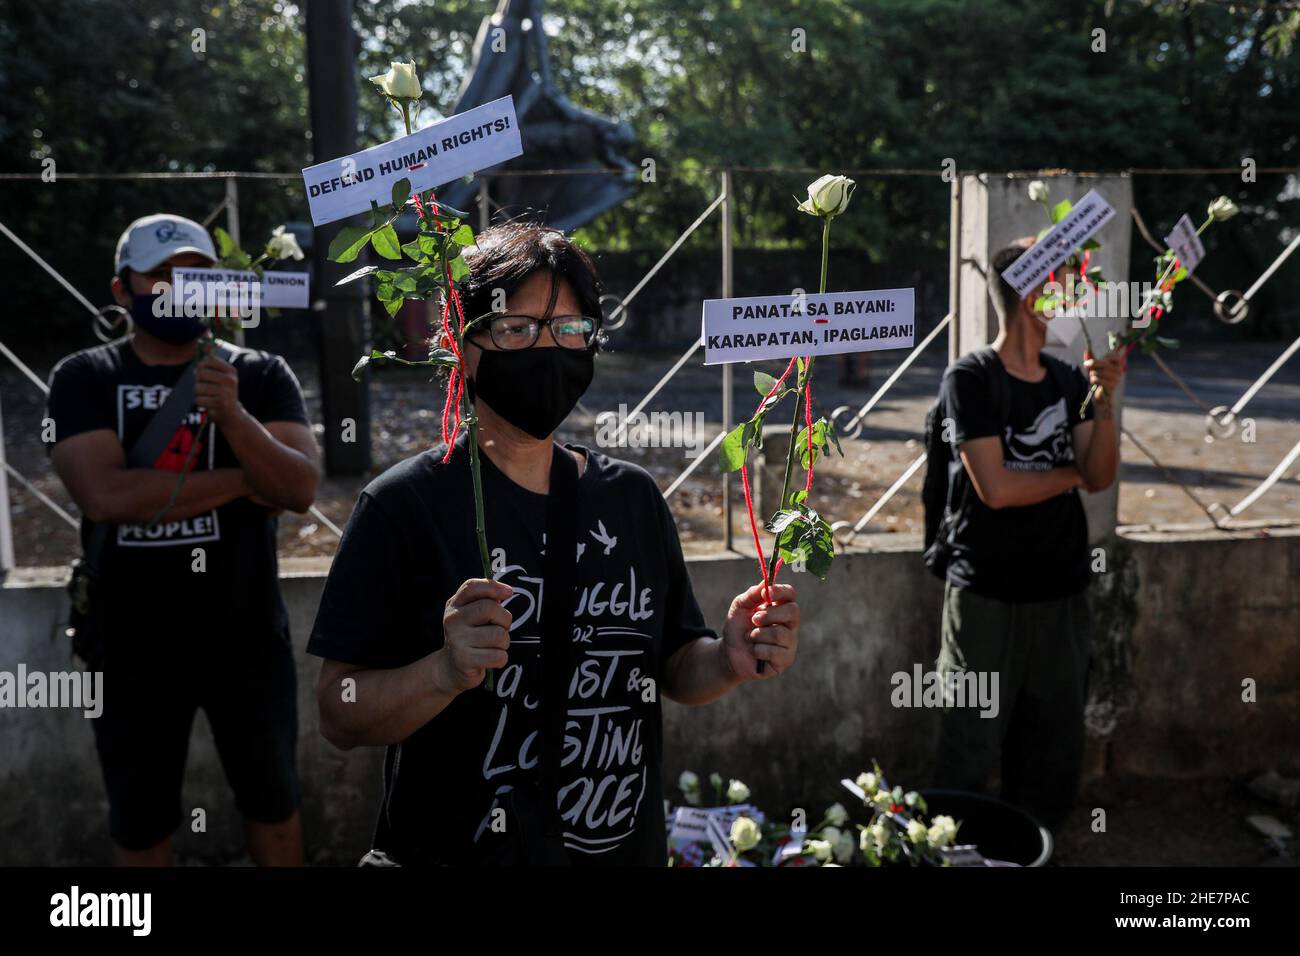 Human rights activists carry signs and offer flowers to remember fallen heroes in commemoration of the 73rd International Human Rights Day in Quezon City, Metro Manila. The monument honors the martyrs and heroes who struggled against the 21-year dictatorship of former President Ferdinand Marcos. Philippines. Stock Photo